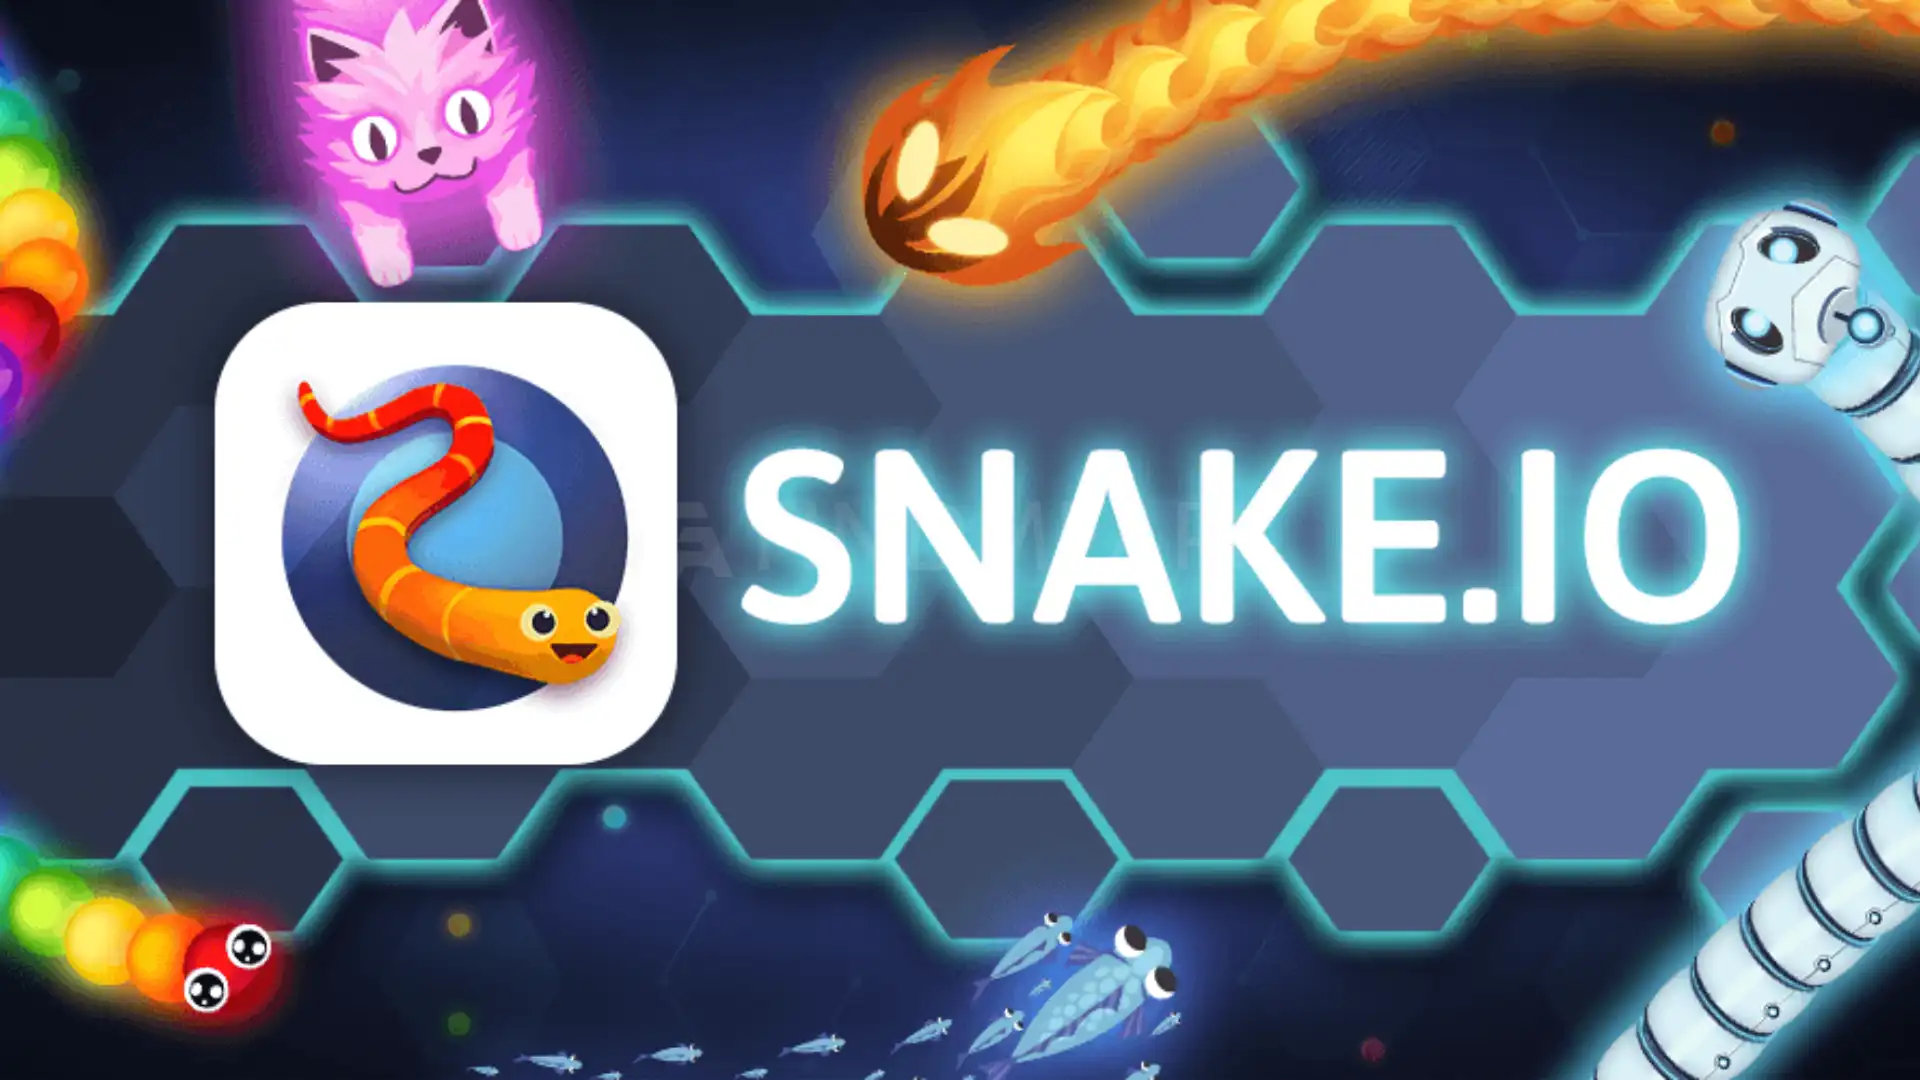 Snake.io Feature Image